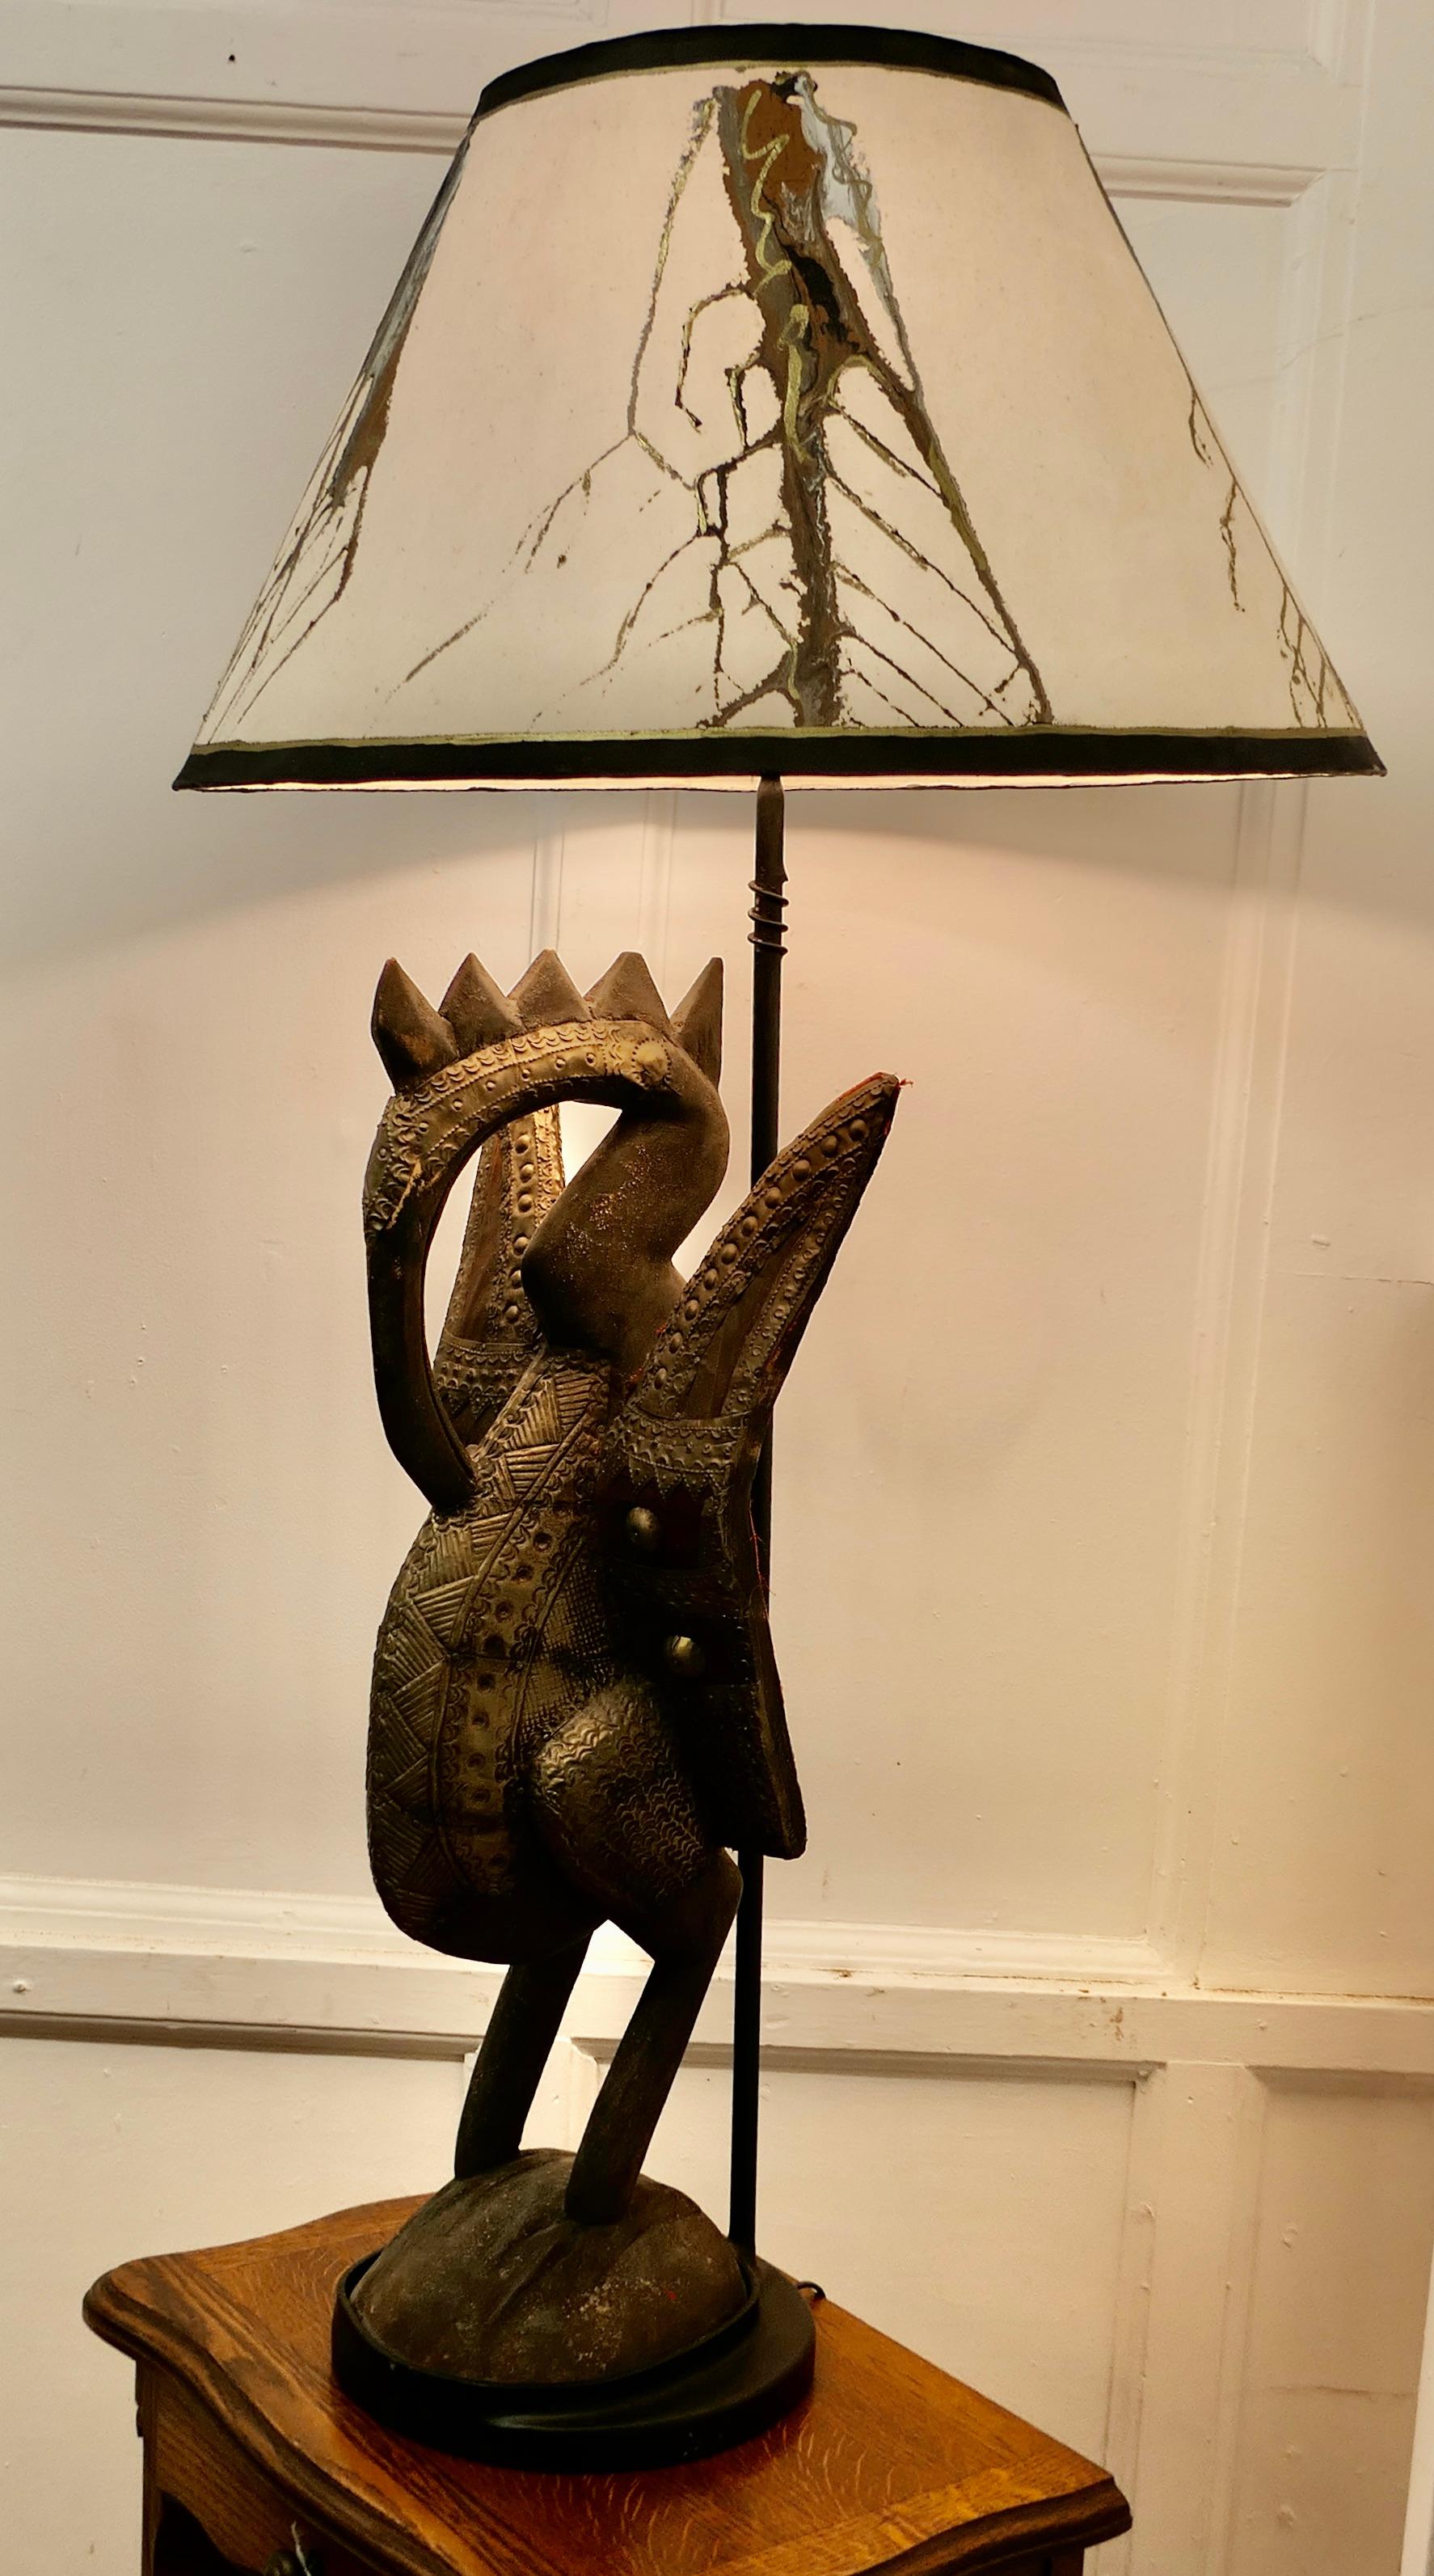 African Senufo Bird Carved Wood Sculpture, set as a Tall Lamp

This wonderful antique carving has been set on a circular plinth which supports a lamp lighting it from above
This is a 'sejen' hornbill bird sculpture from the Senufo people of the